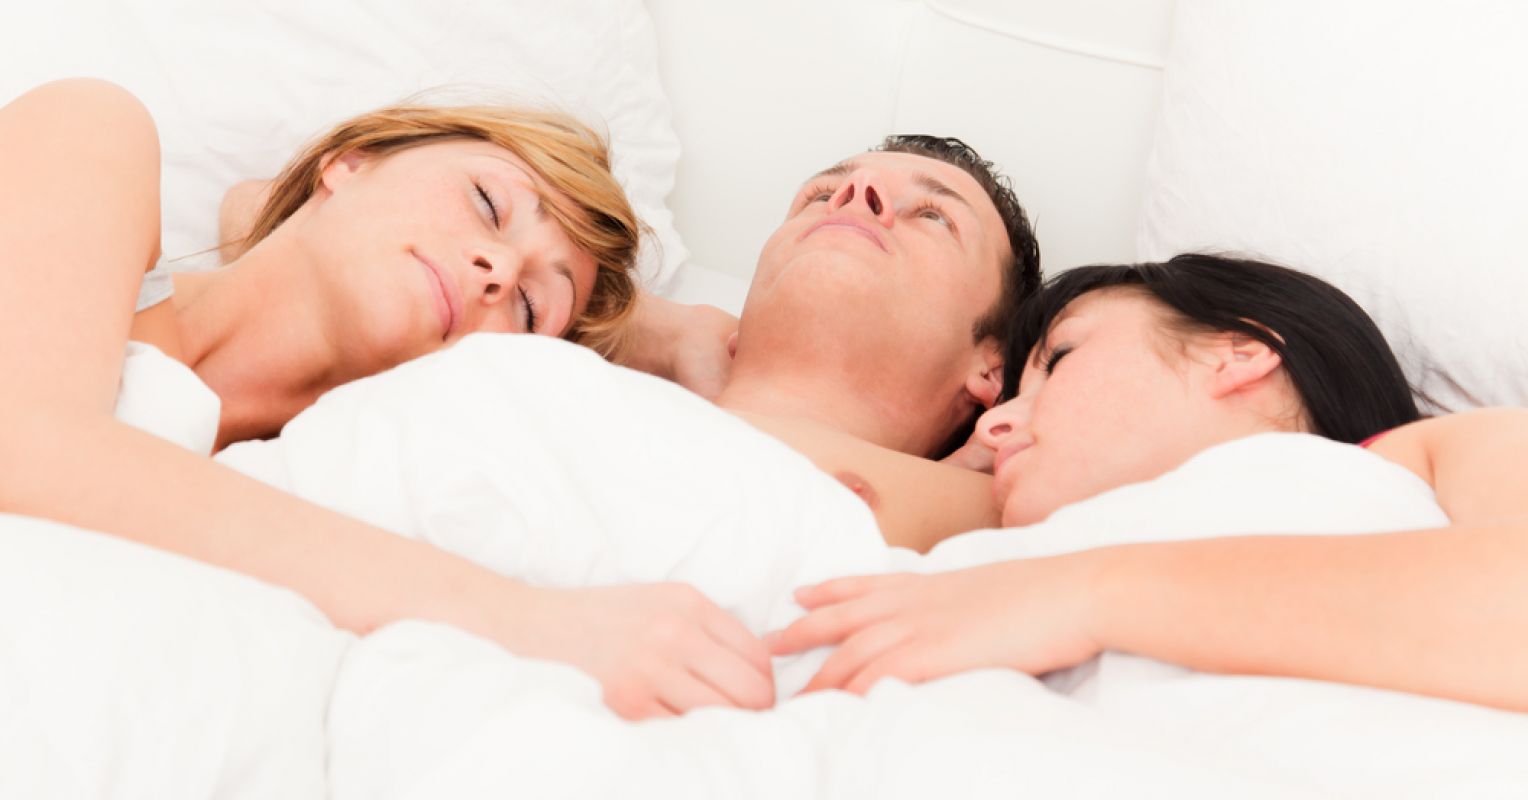 How Many People Have Ever Actually Had a Threesome? Psychology Today picture photo photo